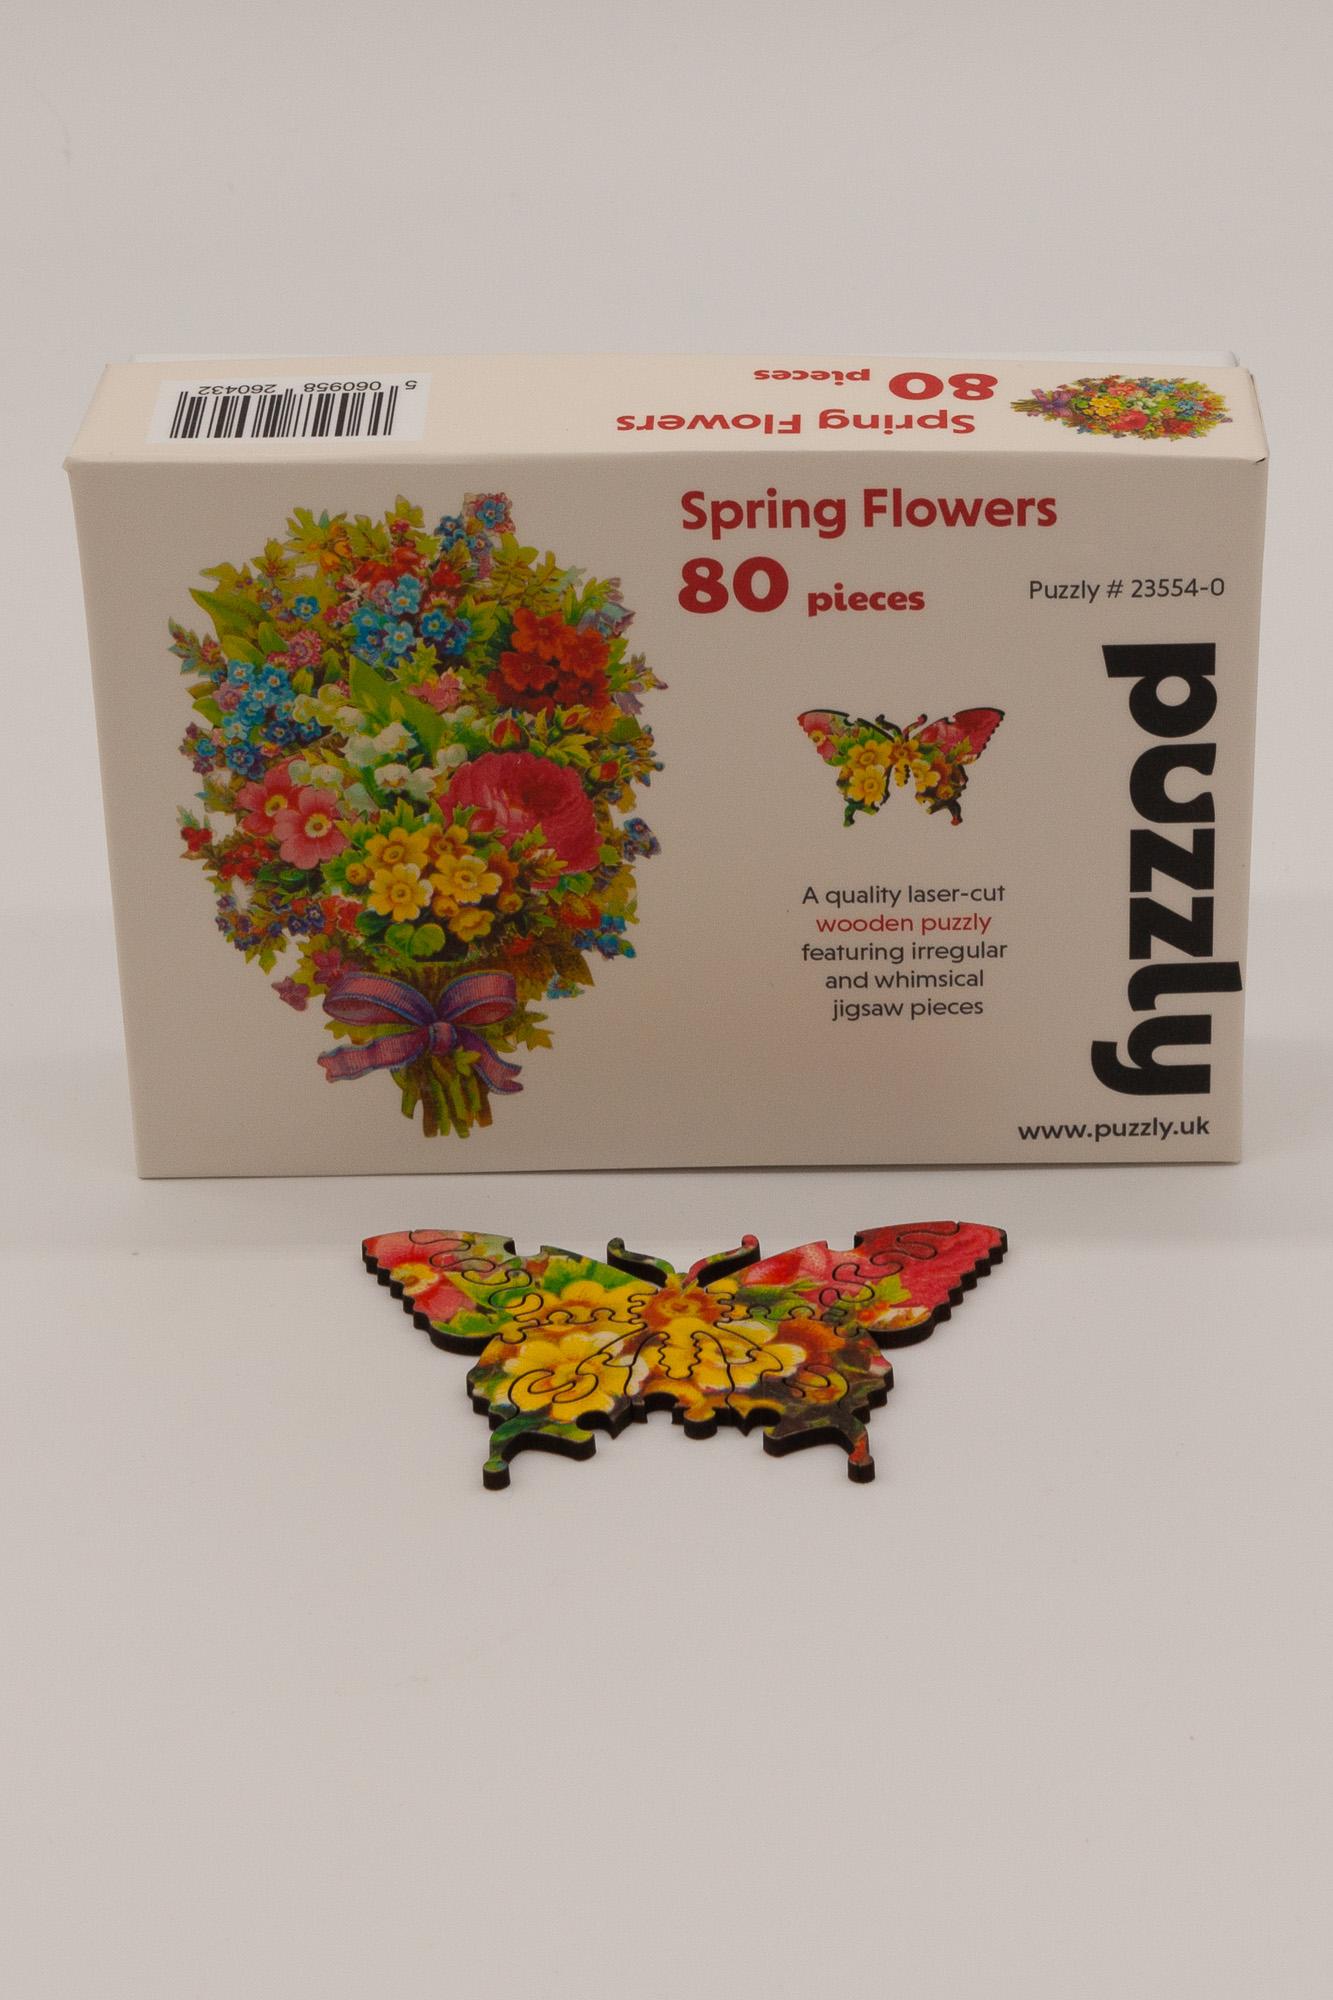 Spring Flowers Wooden Puzzle